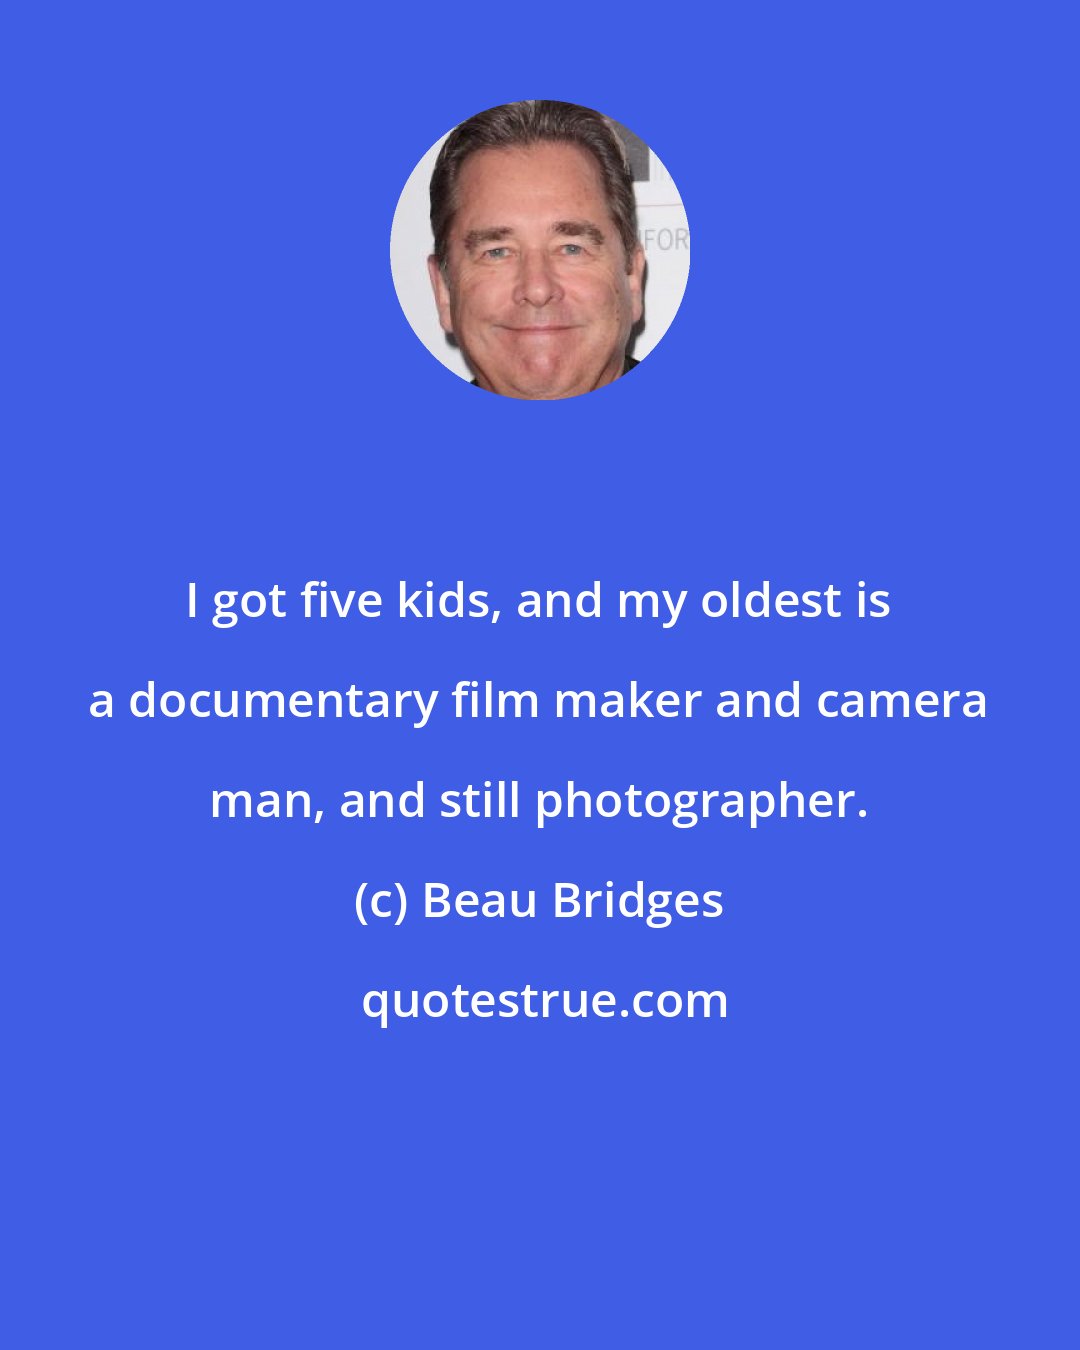 Beau Bridges: I got five kids, and my oldest is a documentary film maker and camera man, and still photographer.